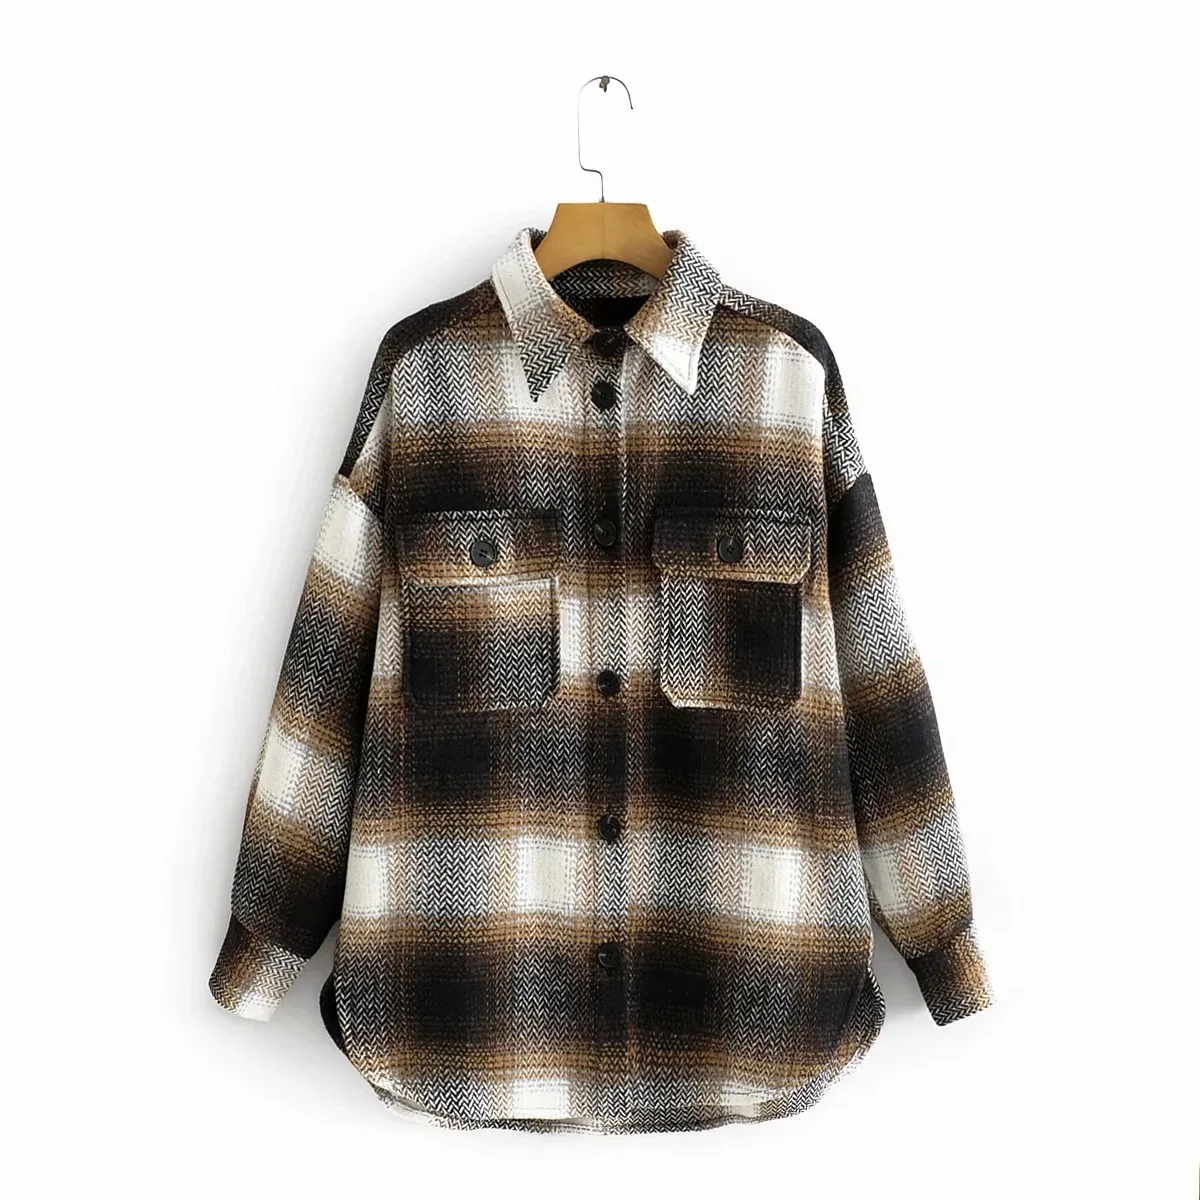 Plaid Shirt Style Coat Vintage Blouse Women Long For Casual Turn-down Collar Plus Size Oversized Full Sleeve Womens Tops